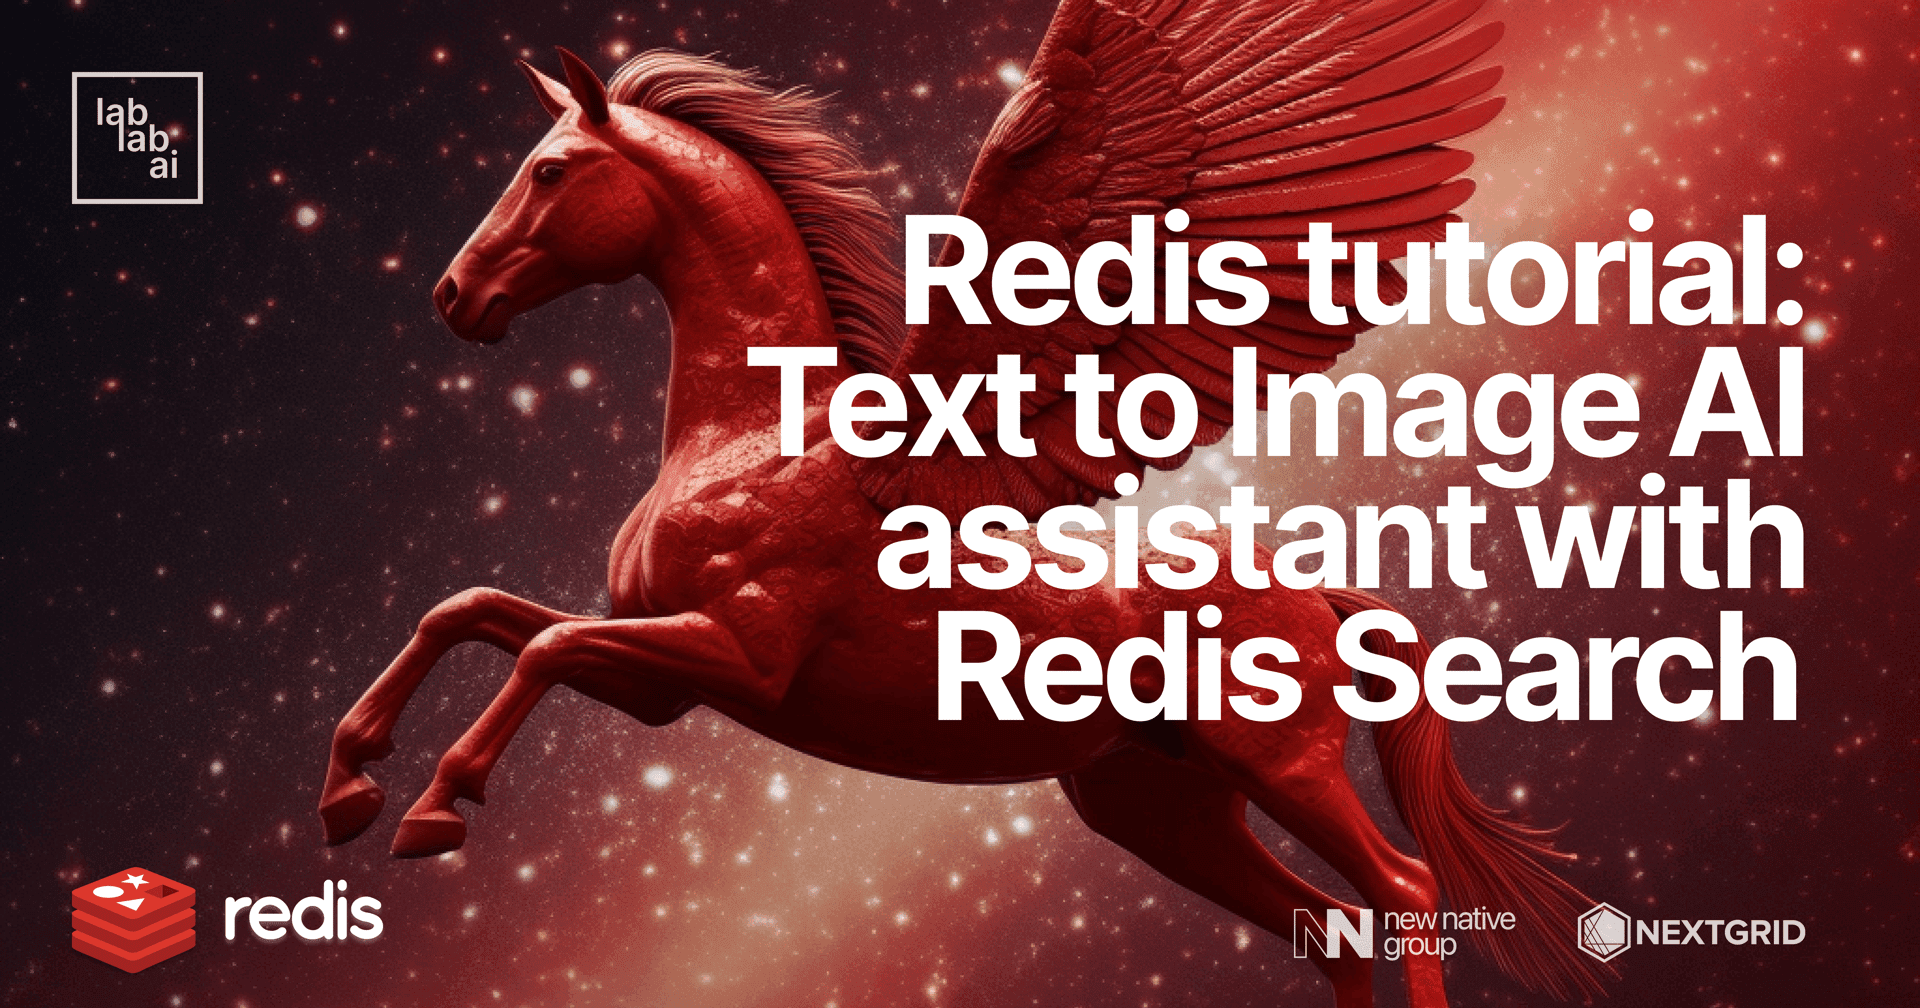 Redis tutorial: Text to Image AI assistant with Redis Search